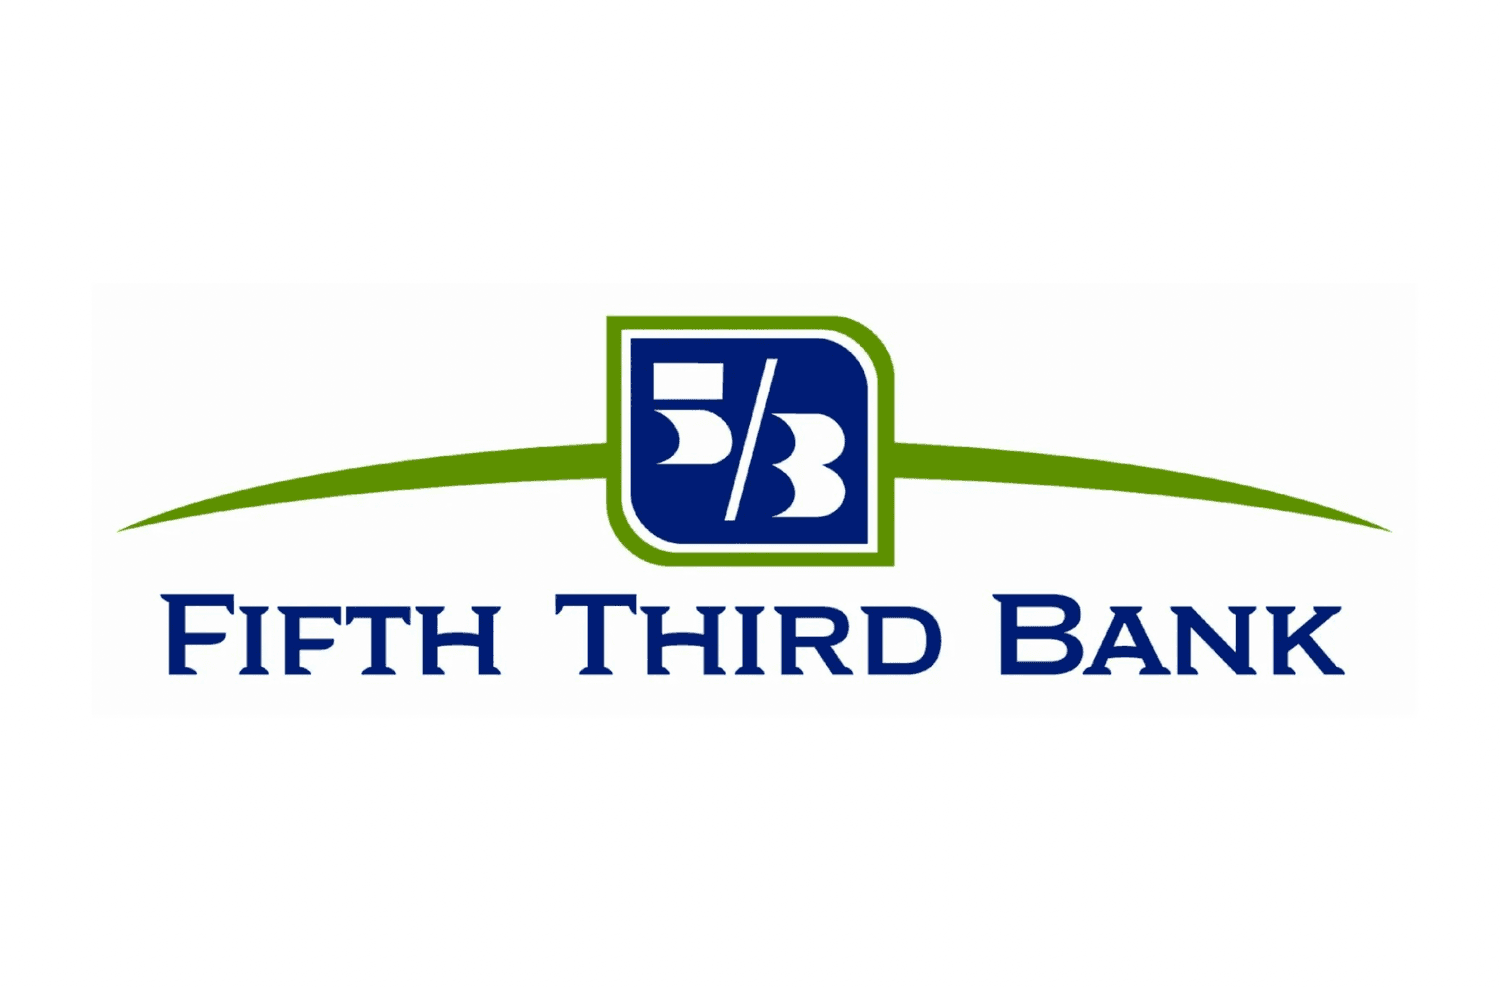 Finding subscriptions on your Fifth Third Bank Cards